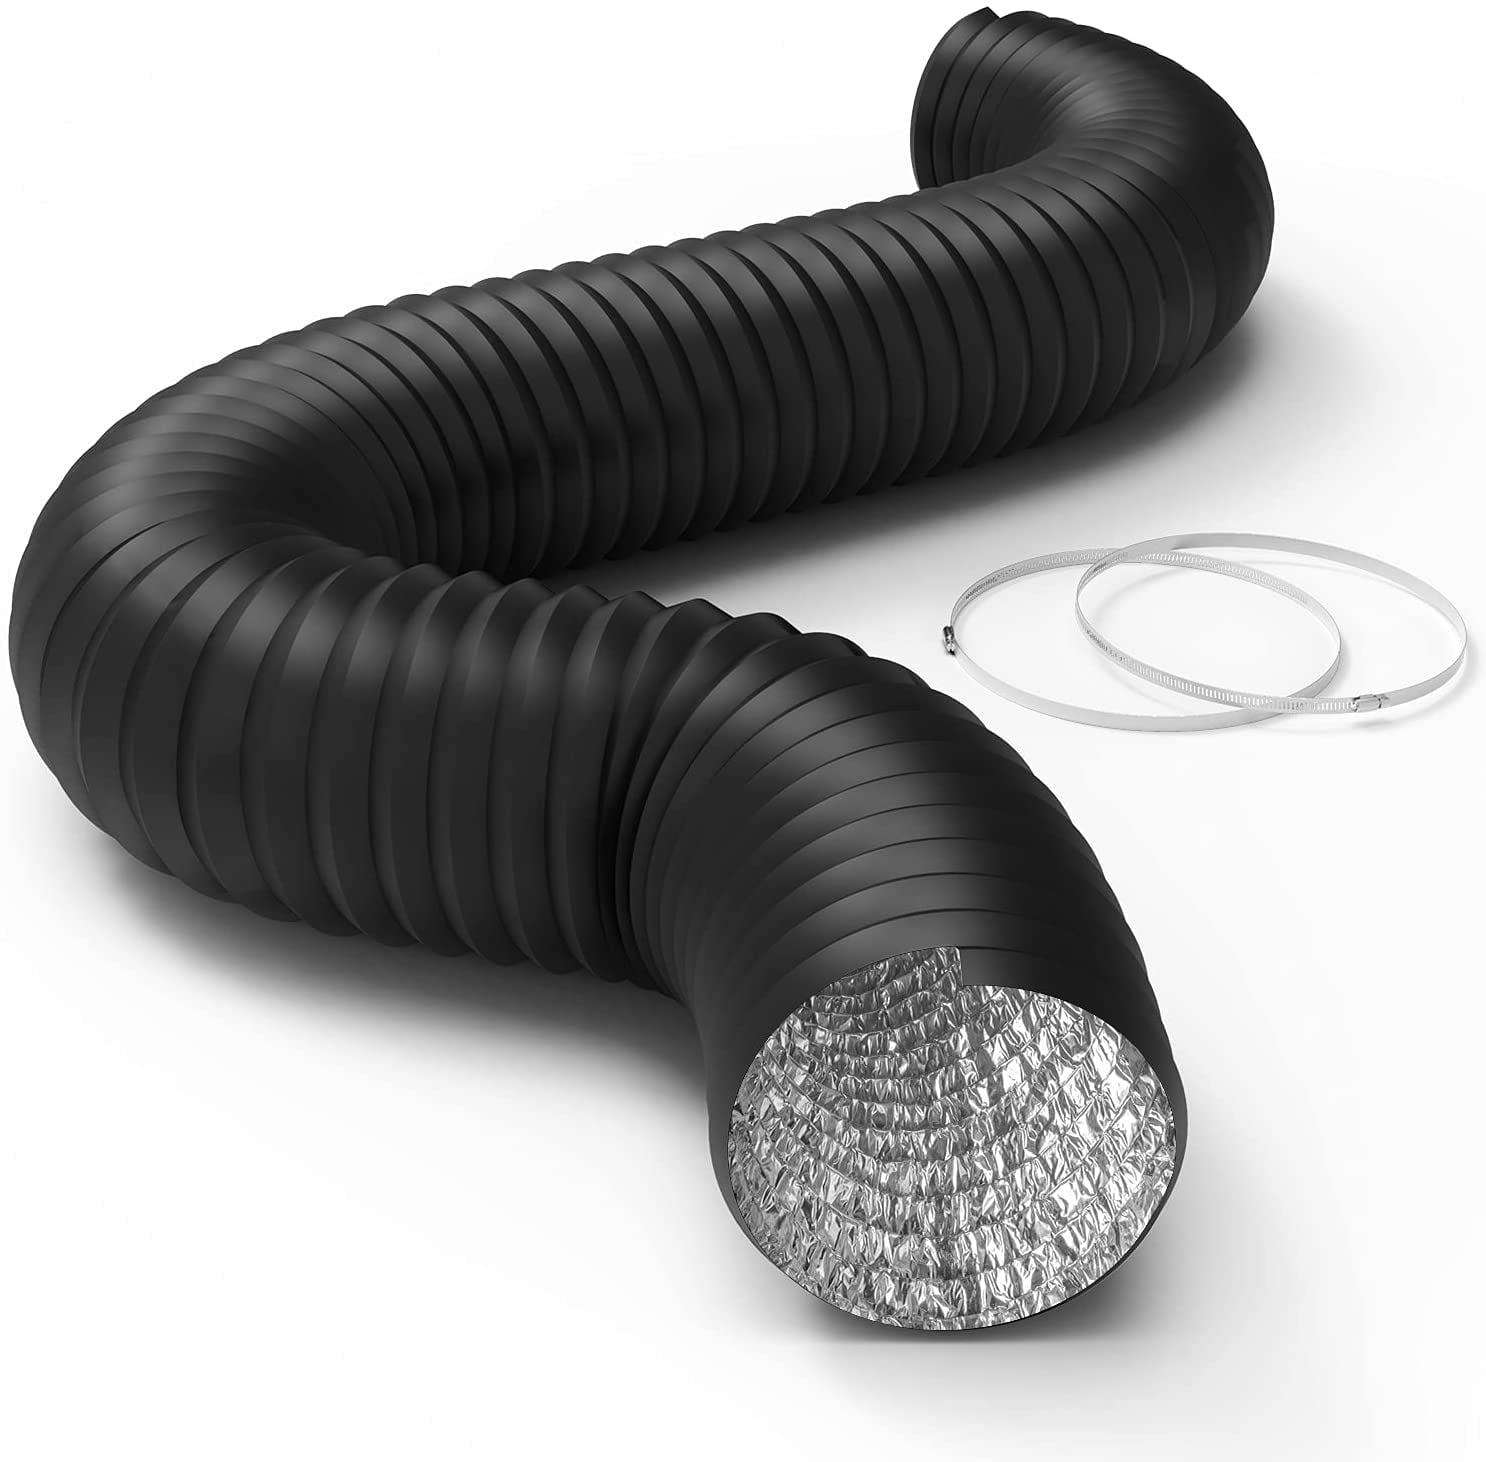 iPower Flexible 12 Inch 8 Feet Aluminum Ducting 4 Layer Protection Dryer  Vent Hose for HVAC Heating Cooling Ventilation and Exhaust,Black 